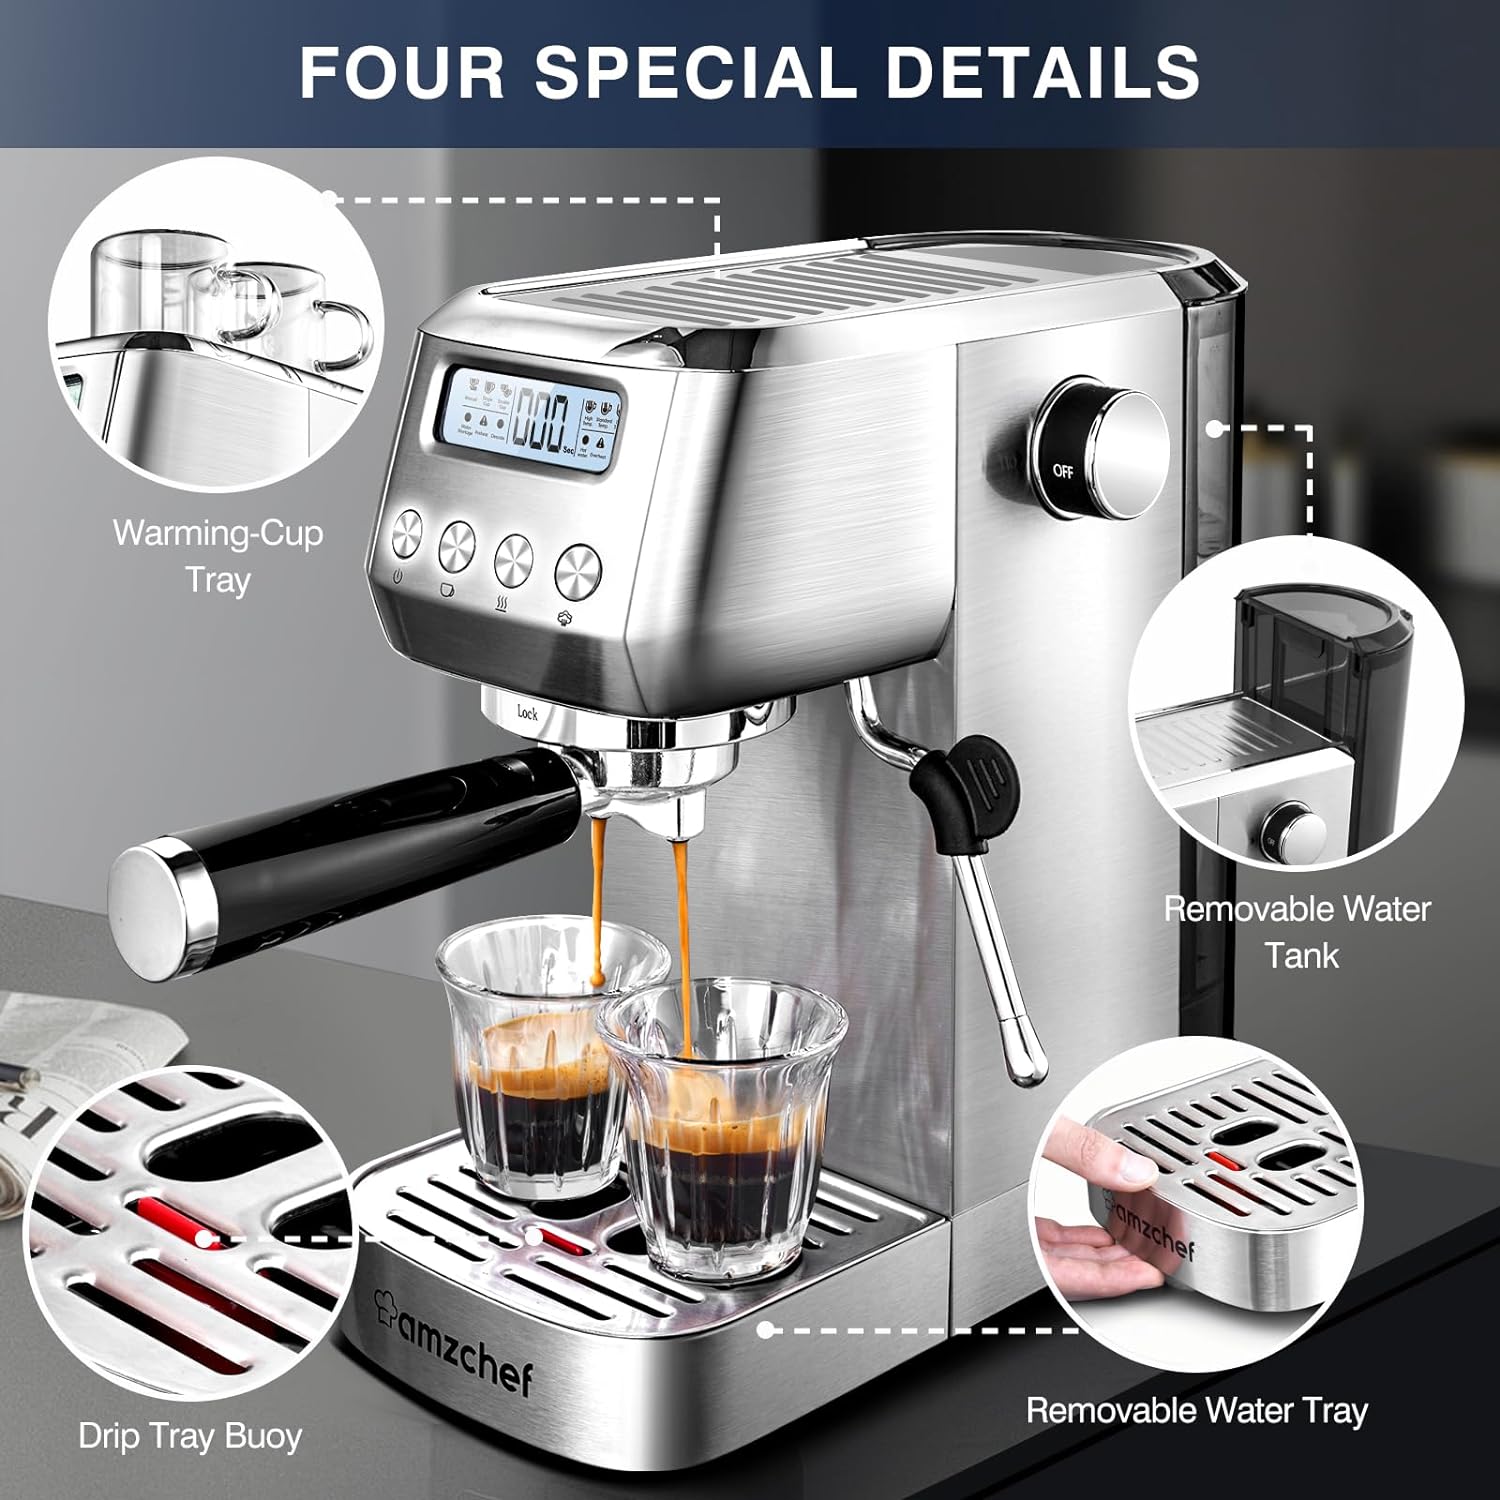 AMZCHEF 20 Bar Espresso Machine with LCD Panel & Milk Frother, 1.3L Tank